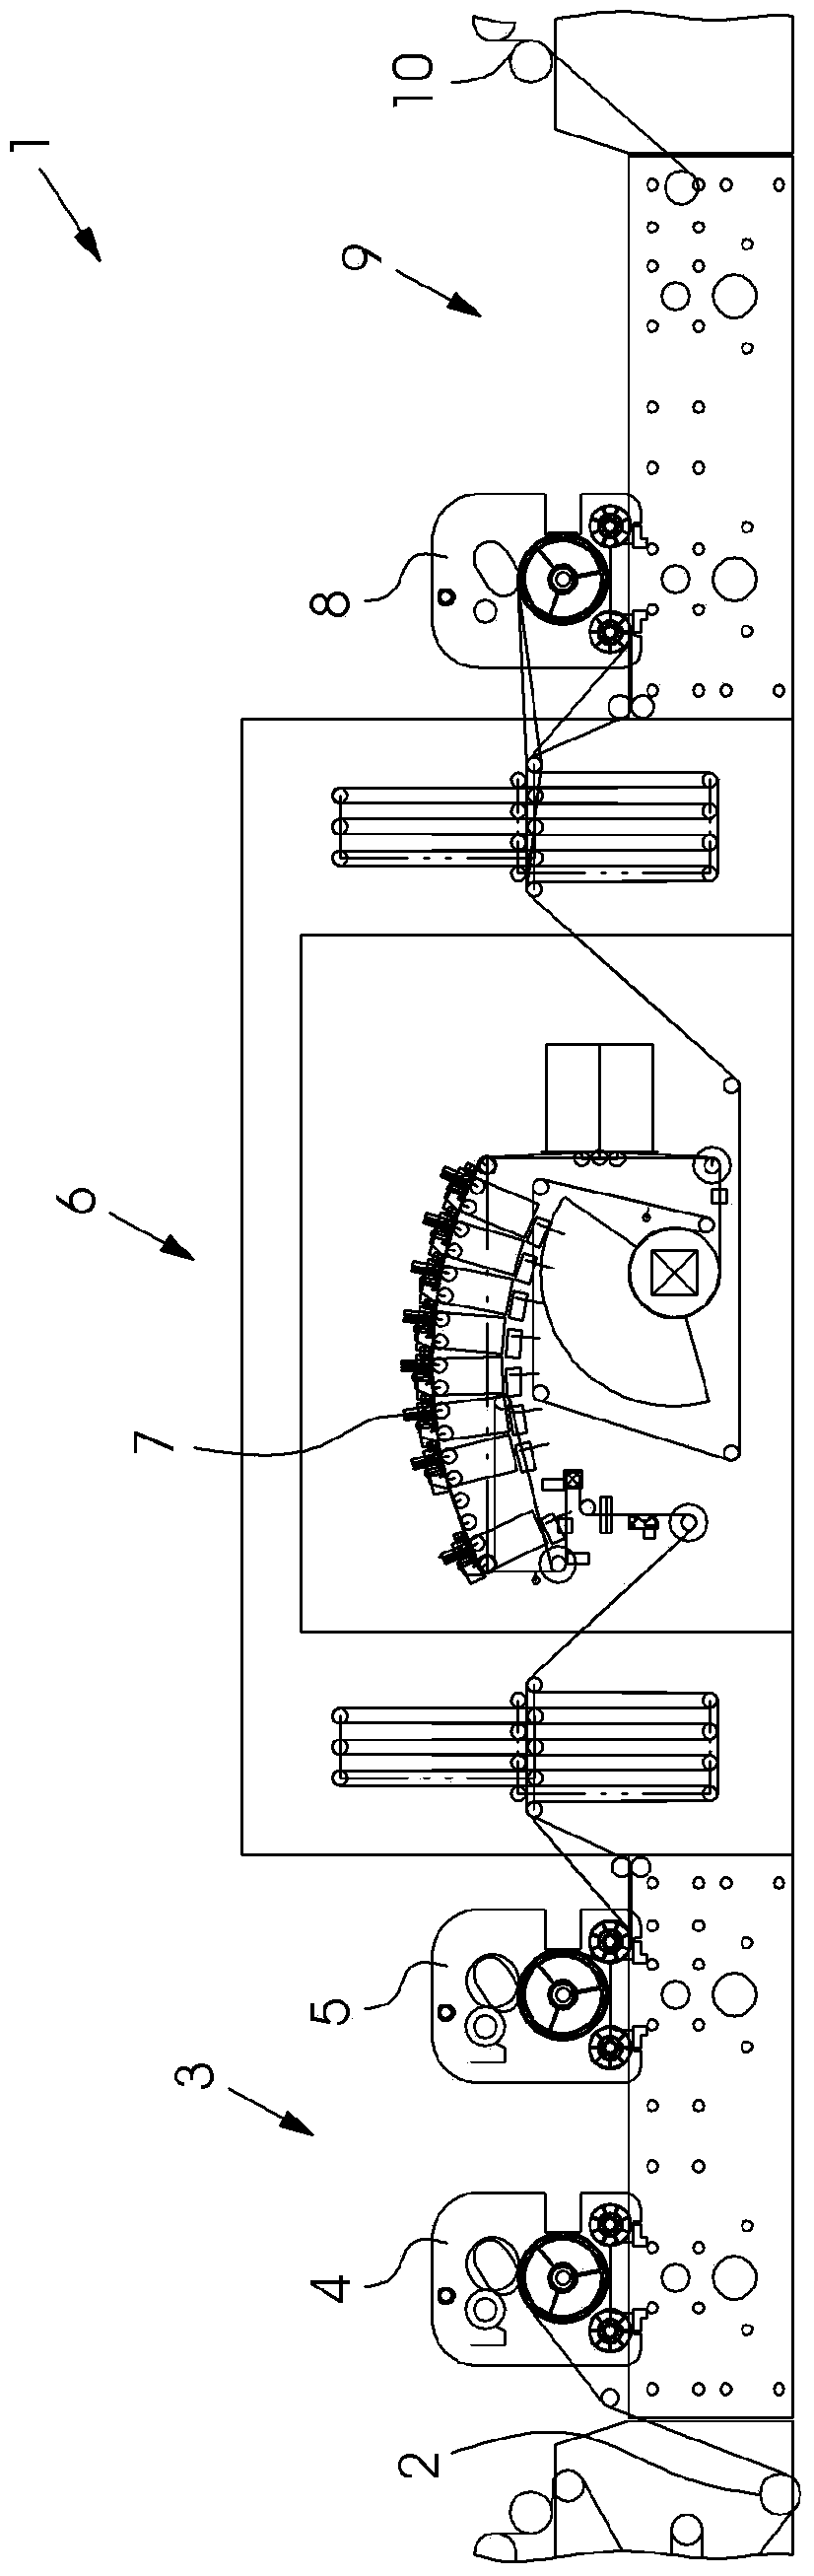 Method for compensating for deactivated printing nozzles in an inkjet system